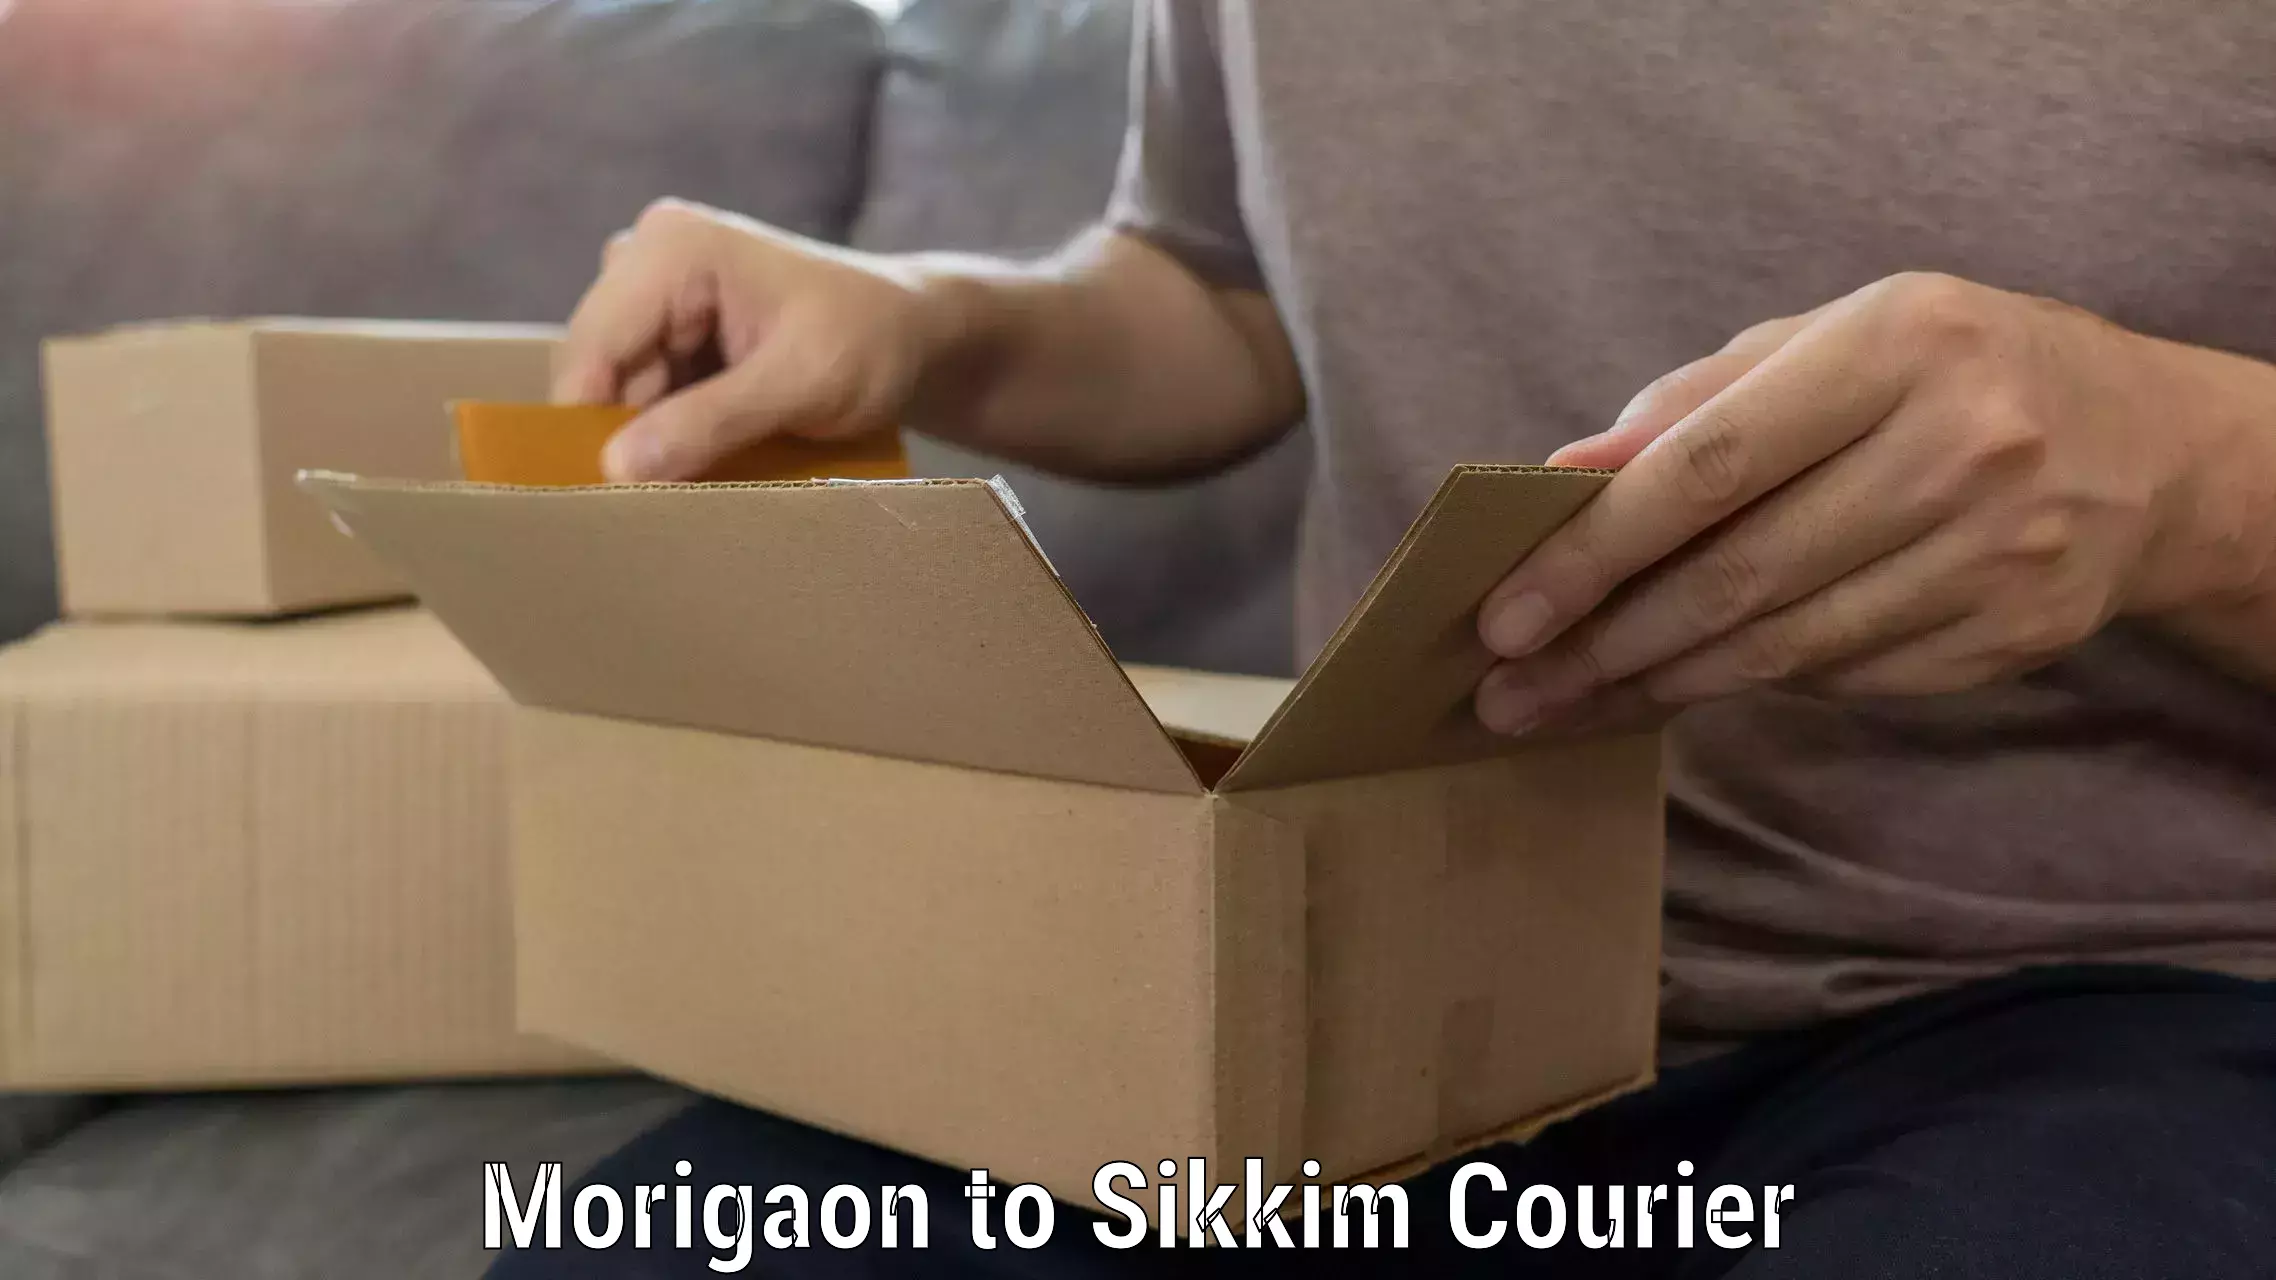 Trusted relocation experts Morigaon to Sikkim